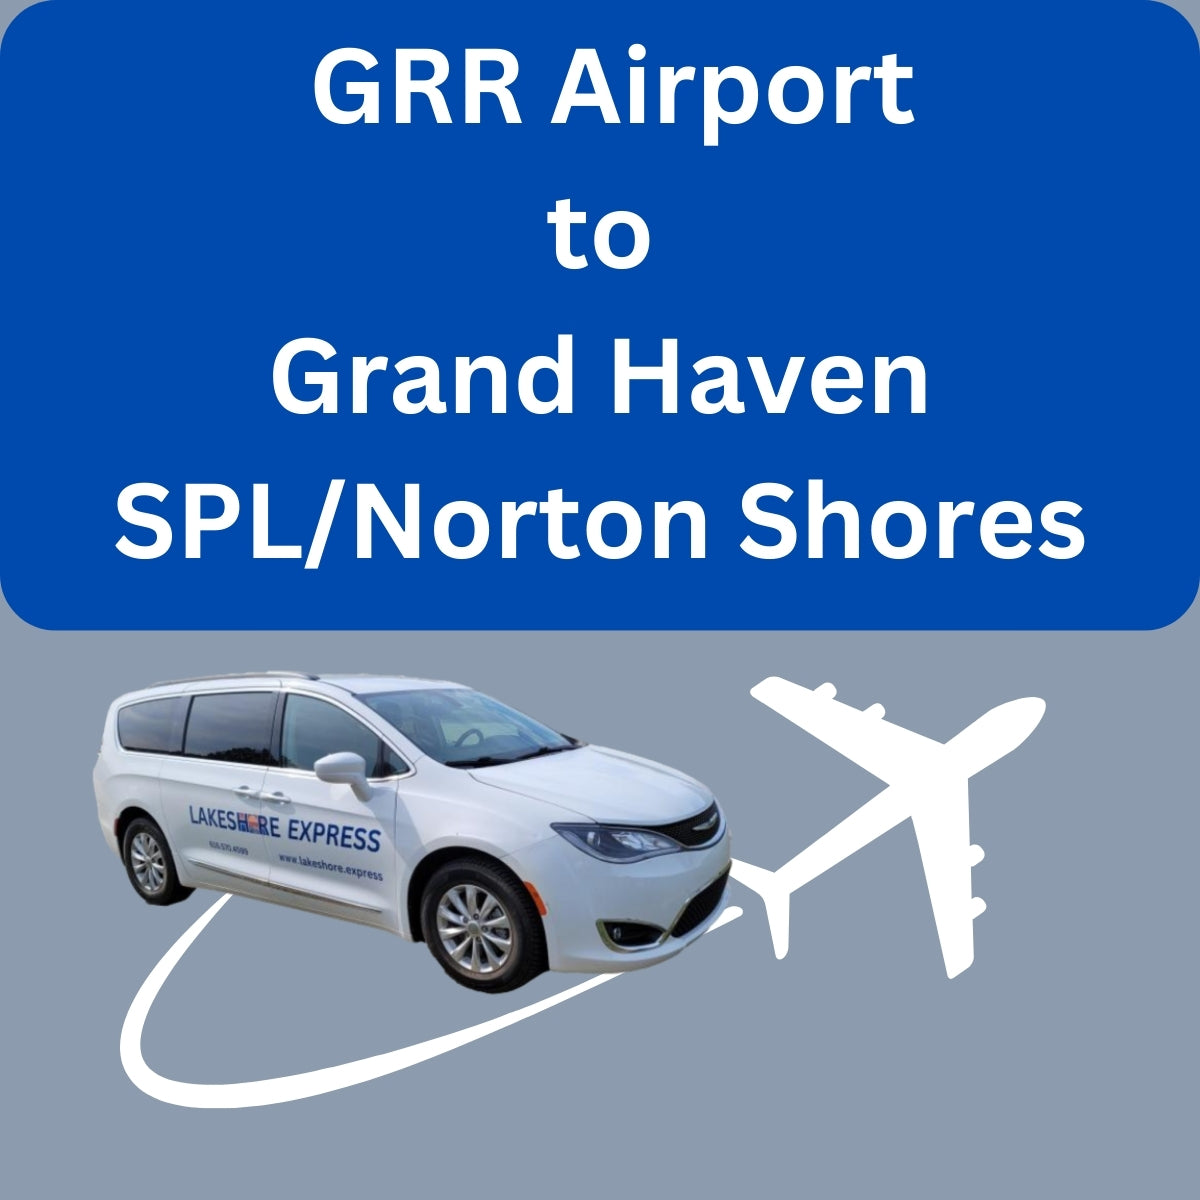 GRR Airport to Grand Haven/Spring Lake/Norton Shores - $79.95 per entire party